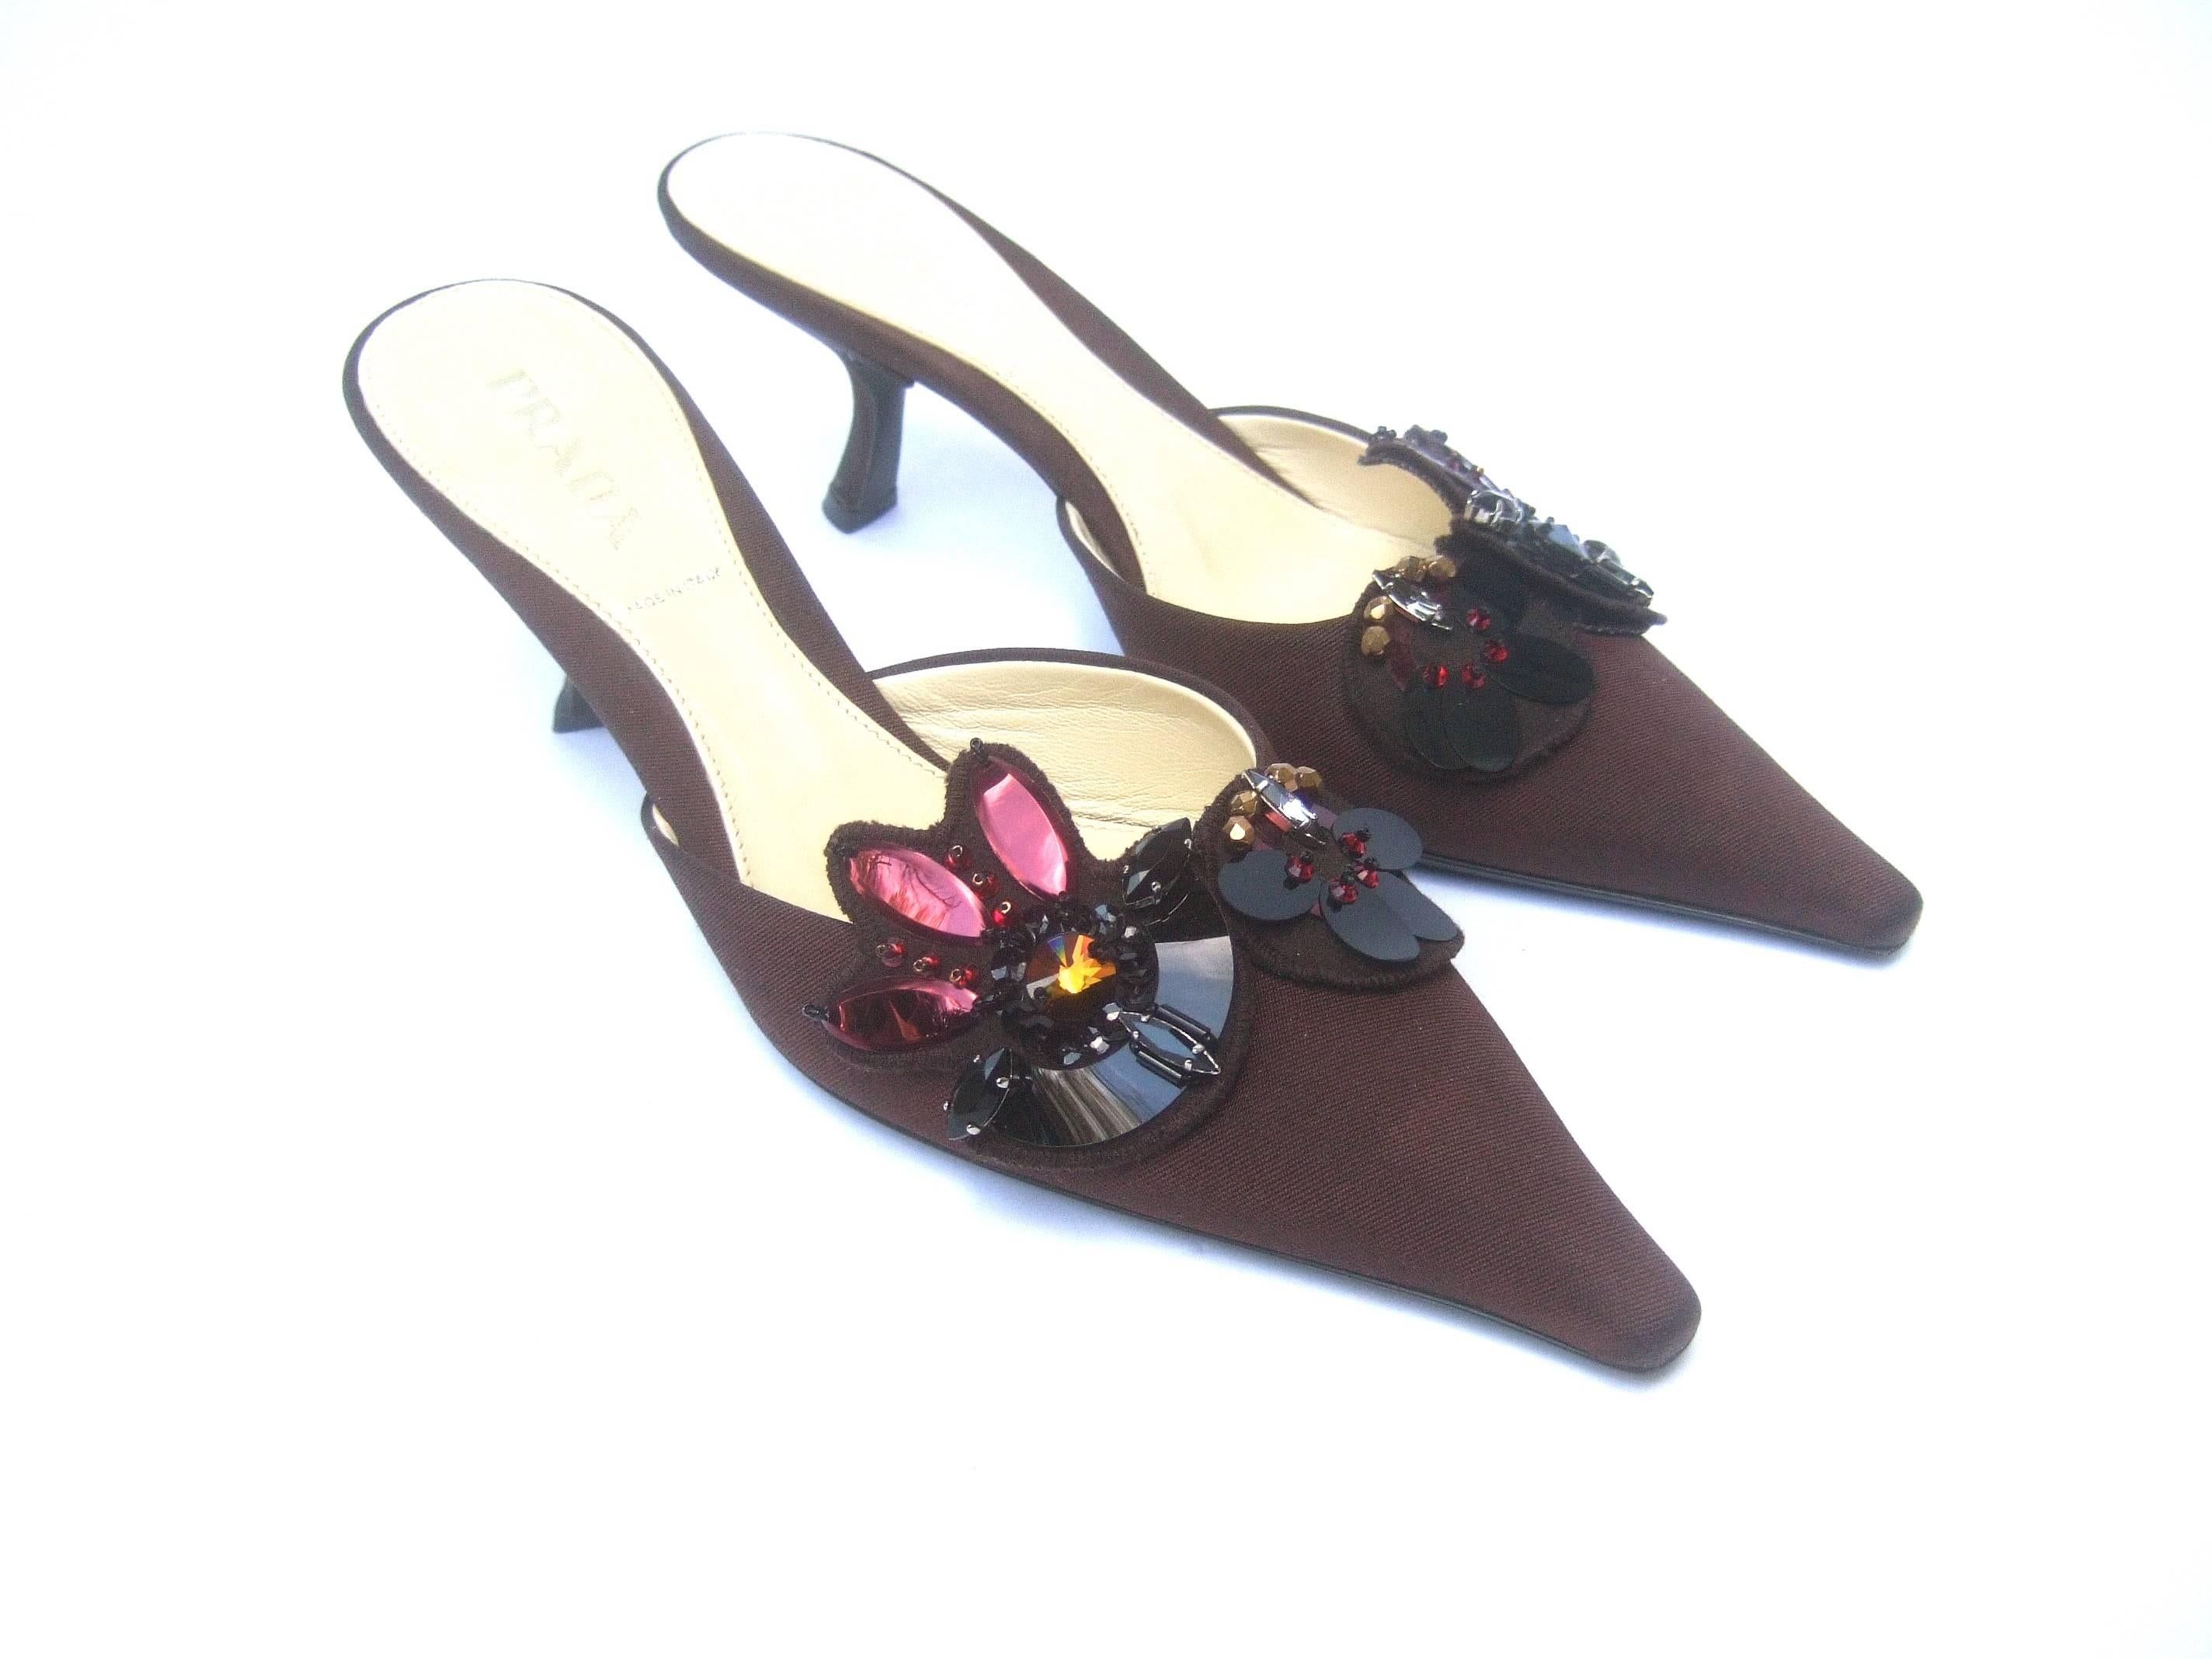 Prada Italy chocolate brown jeweled satin mules Size 37
The stylish Italian shoes are embellished glittering 
crystals and sequined palettes on the front

The pointed toe pumps are covered with dark brown 
satin fabric. Paired with the Prada shoe